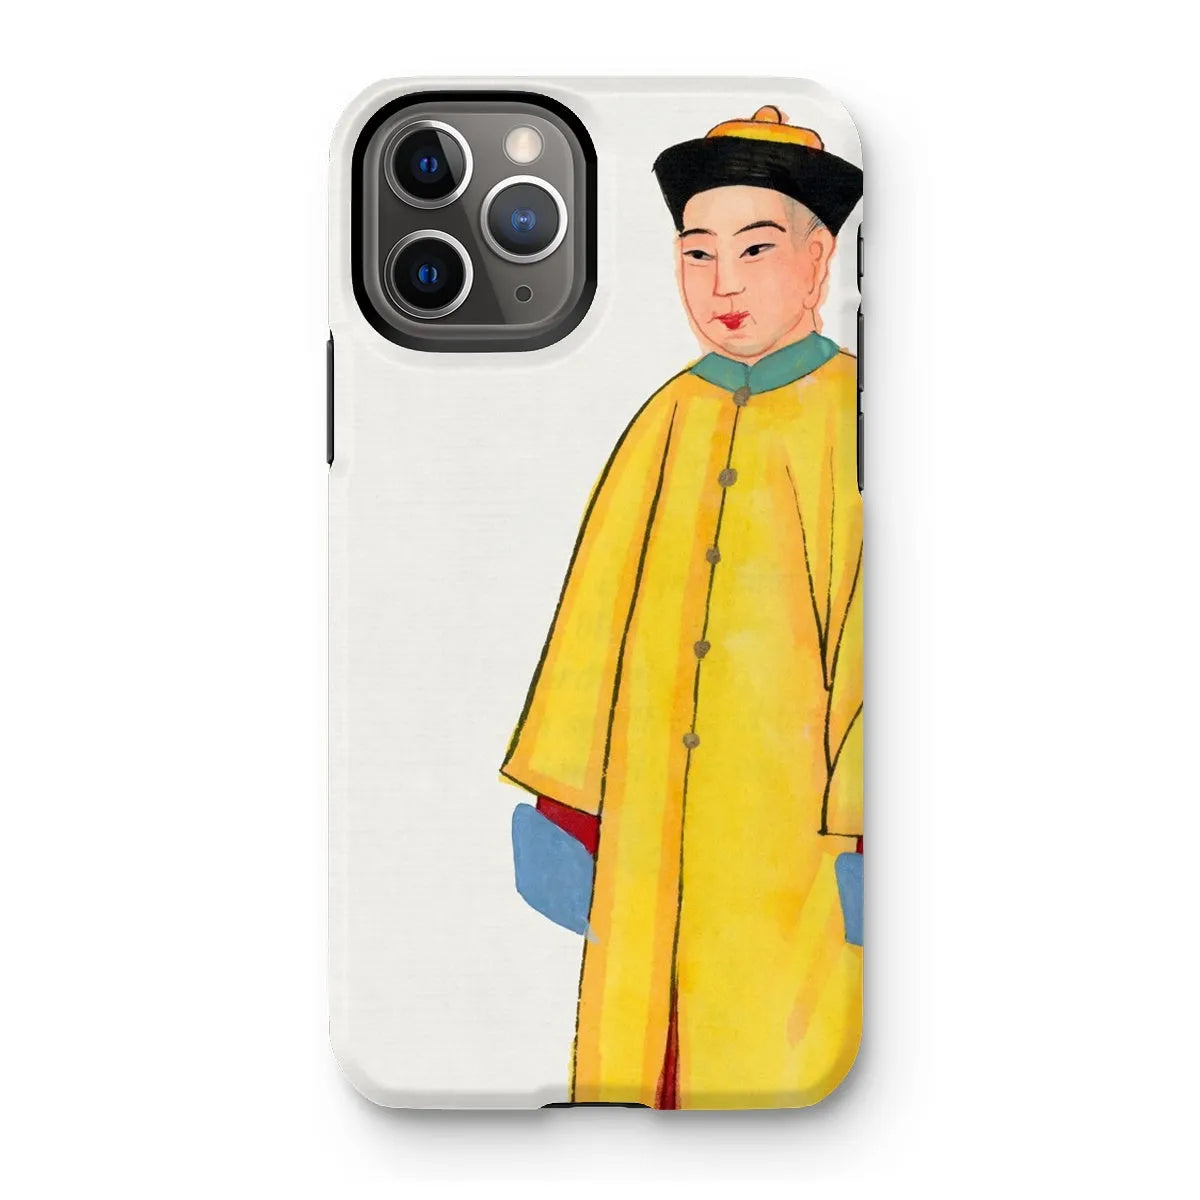 Priest In Yellow Robes - Chinese Aesthetic Art Phone Case - Iphone 11 Pro / Matte - Mobile Phone Cases - Aesthetic Art